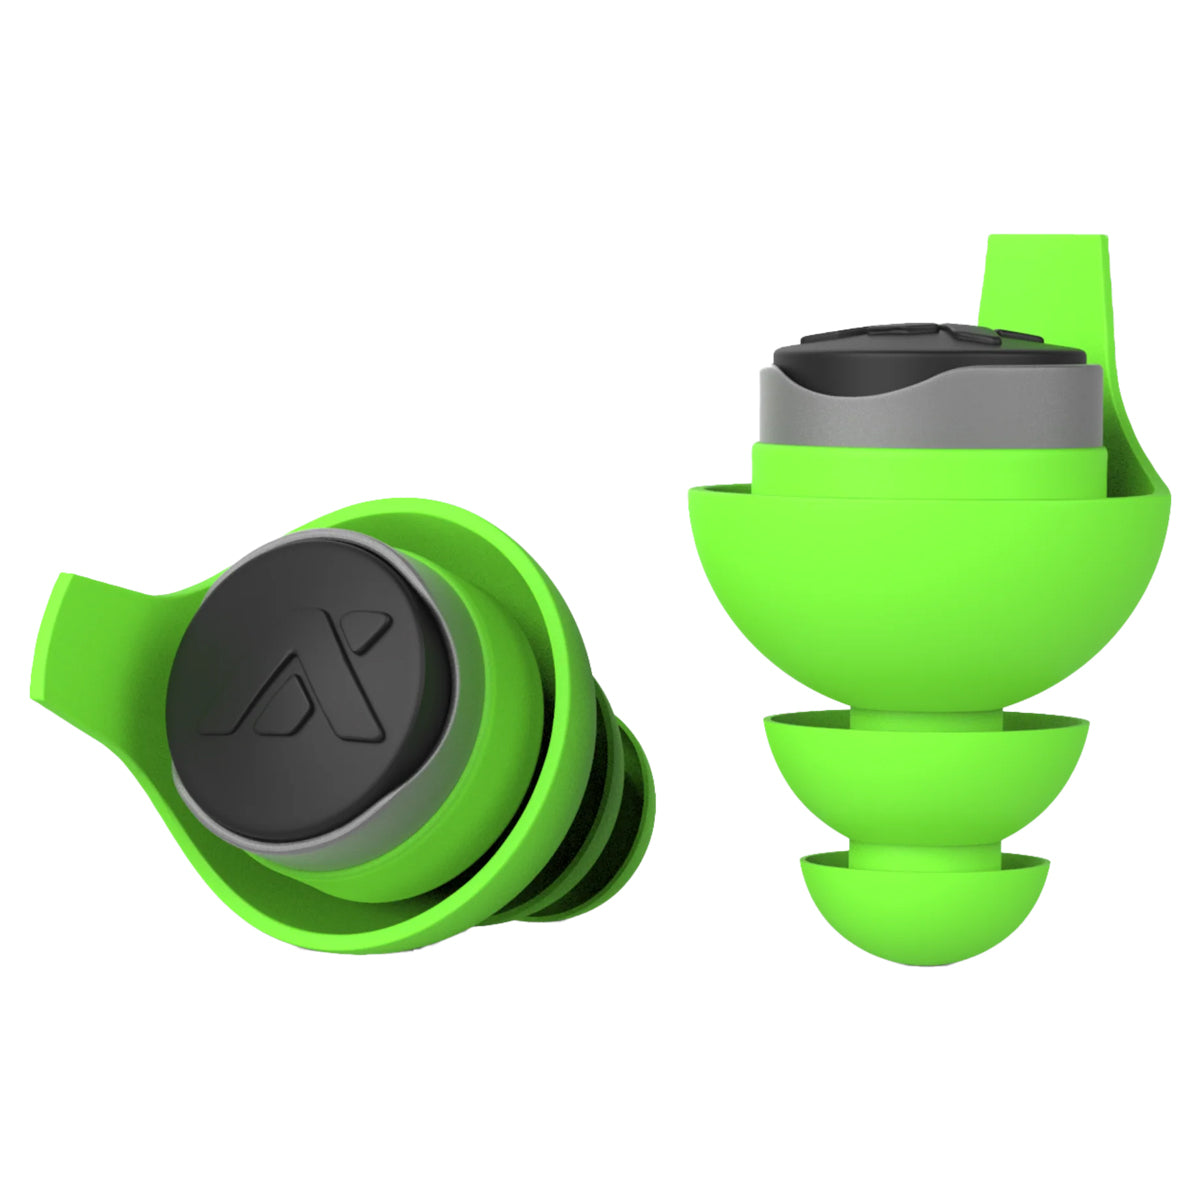 Axil XP Defender Ear Plugs in Green by GOHUNT | Axil - GOHUNT Shop